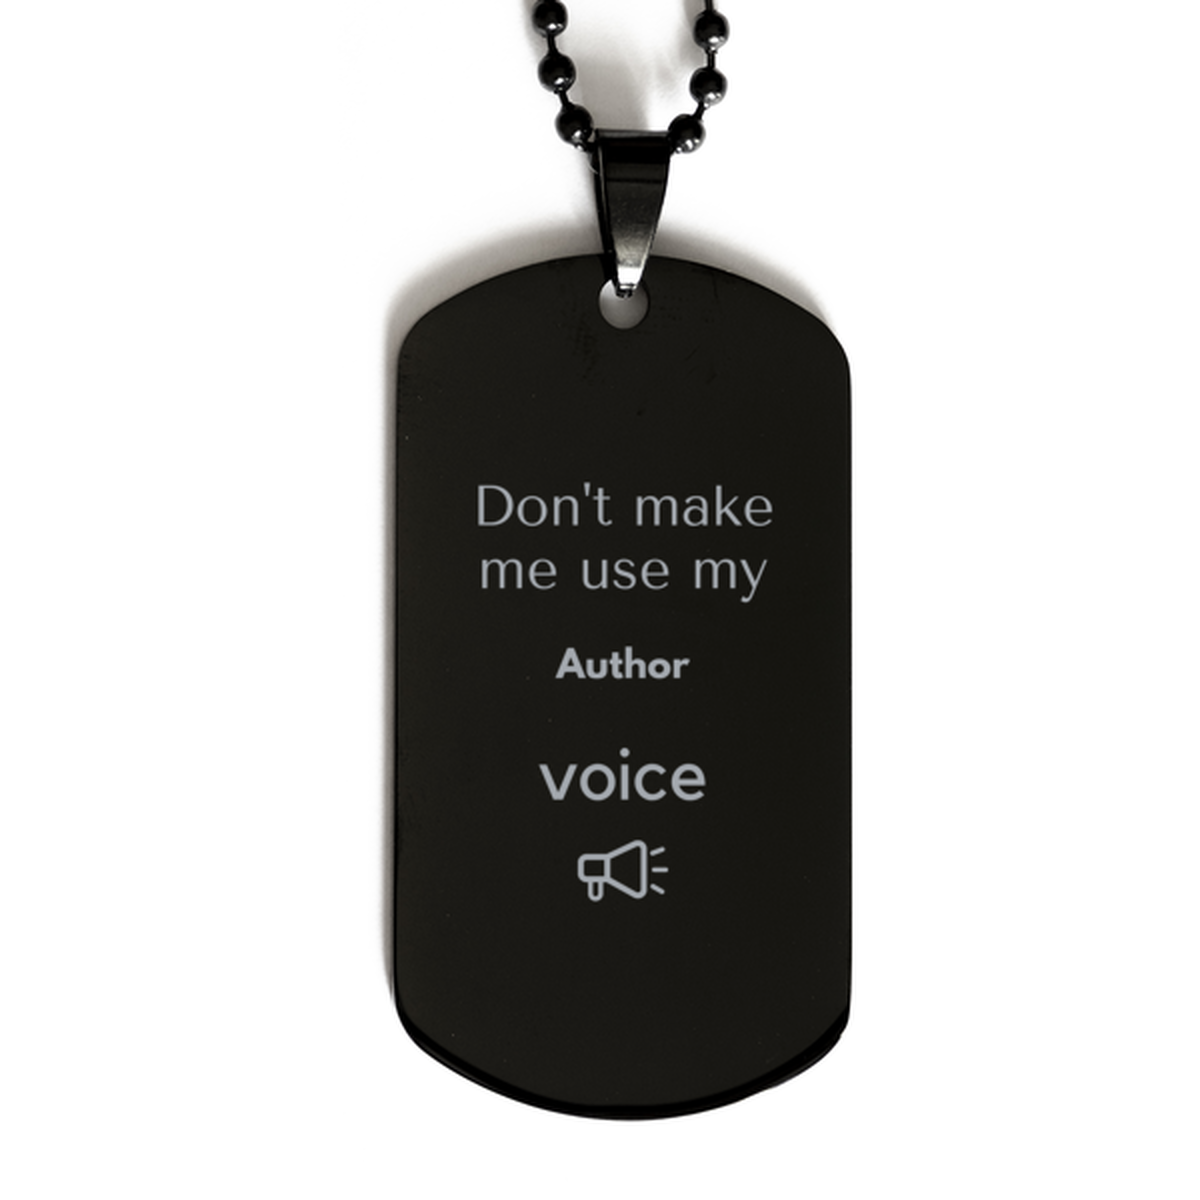 Don't make me use my Author voice, Sarcasm Author Gifts, Christmas Author Black Dog Tag Birthday Unique Gifts For Author Coworkers, Men, Women, Colleague, Friends